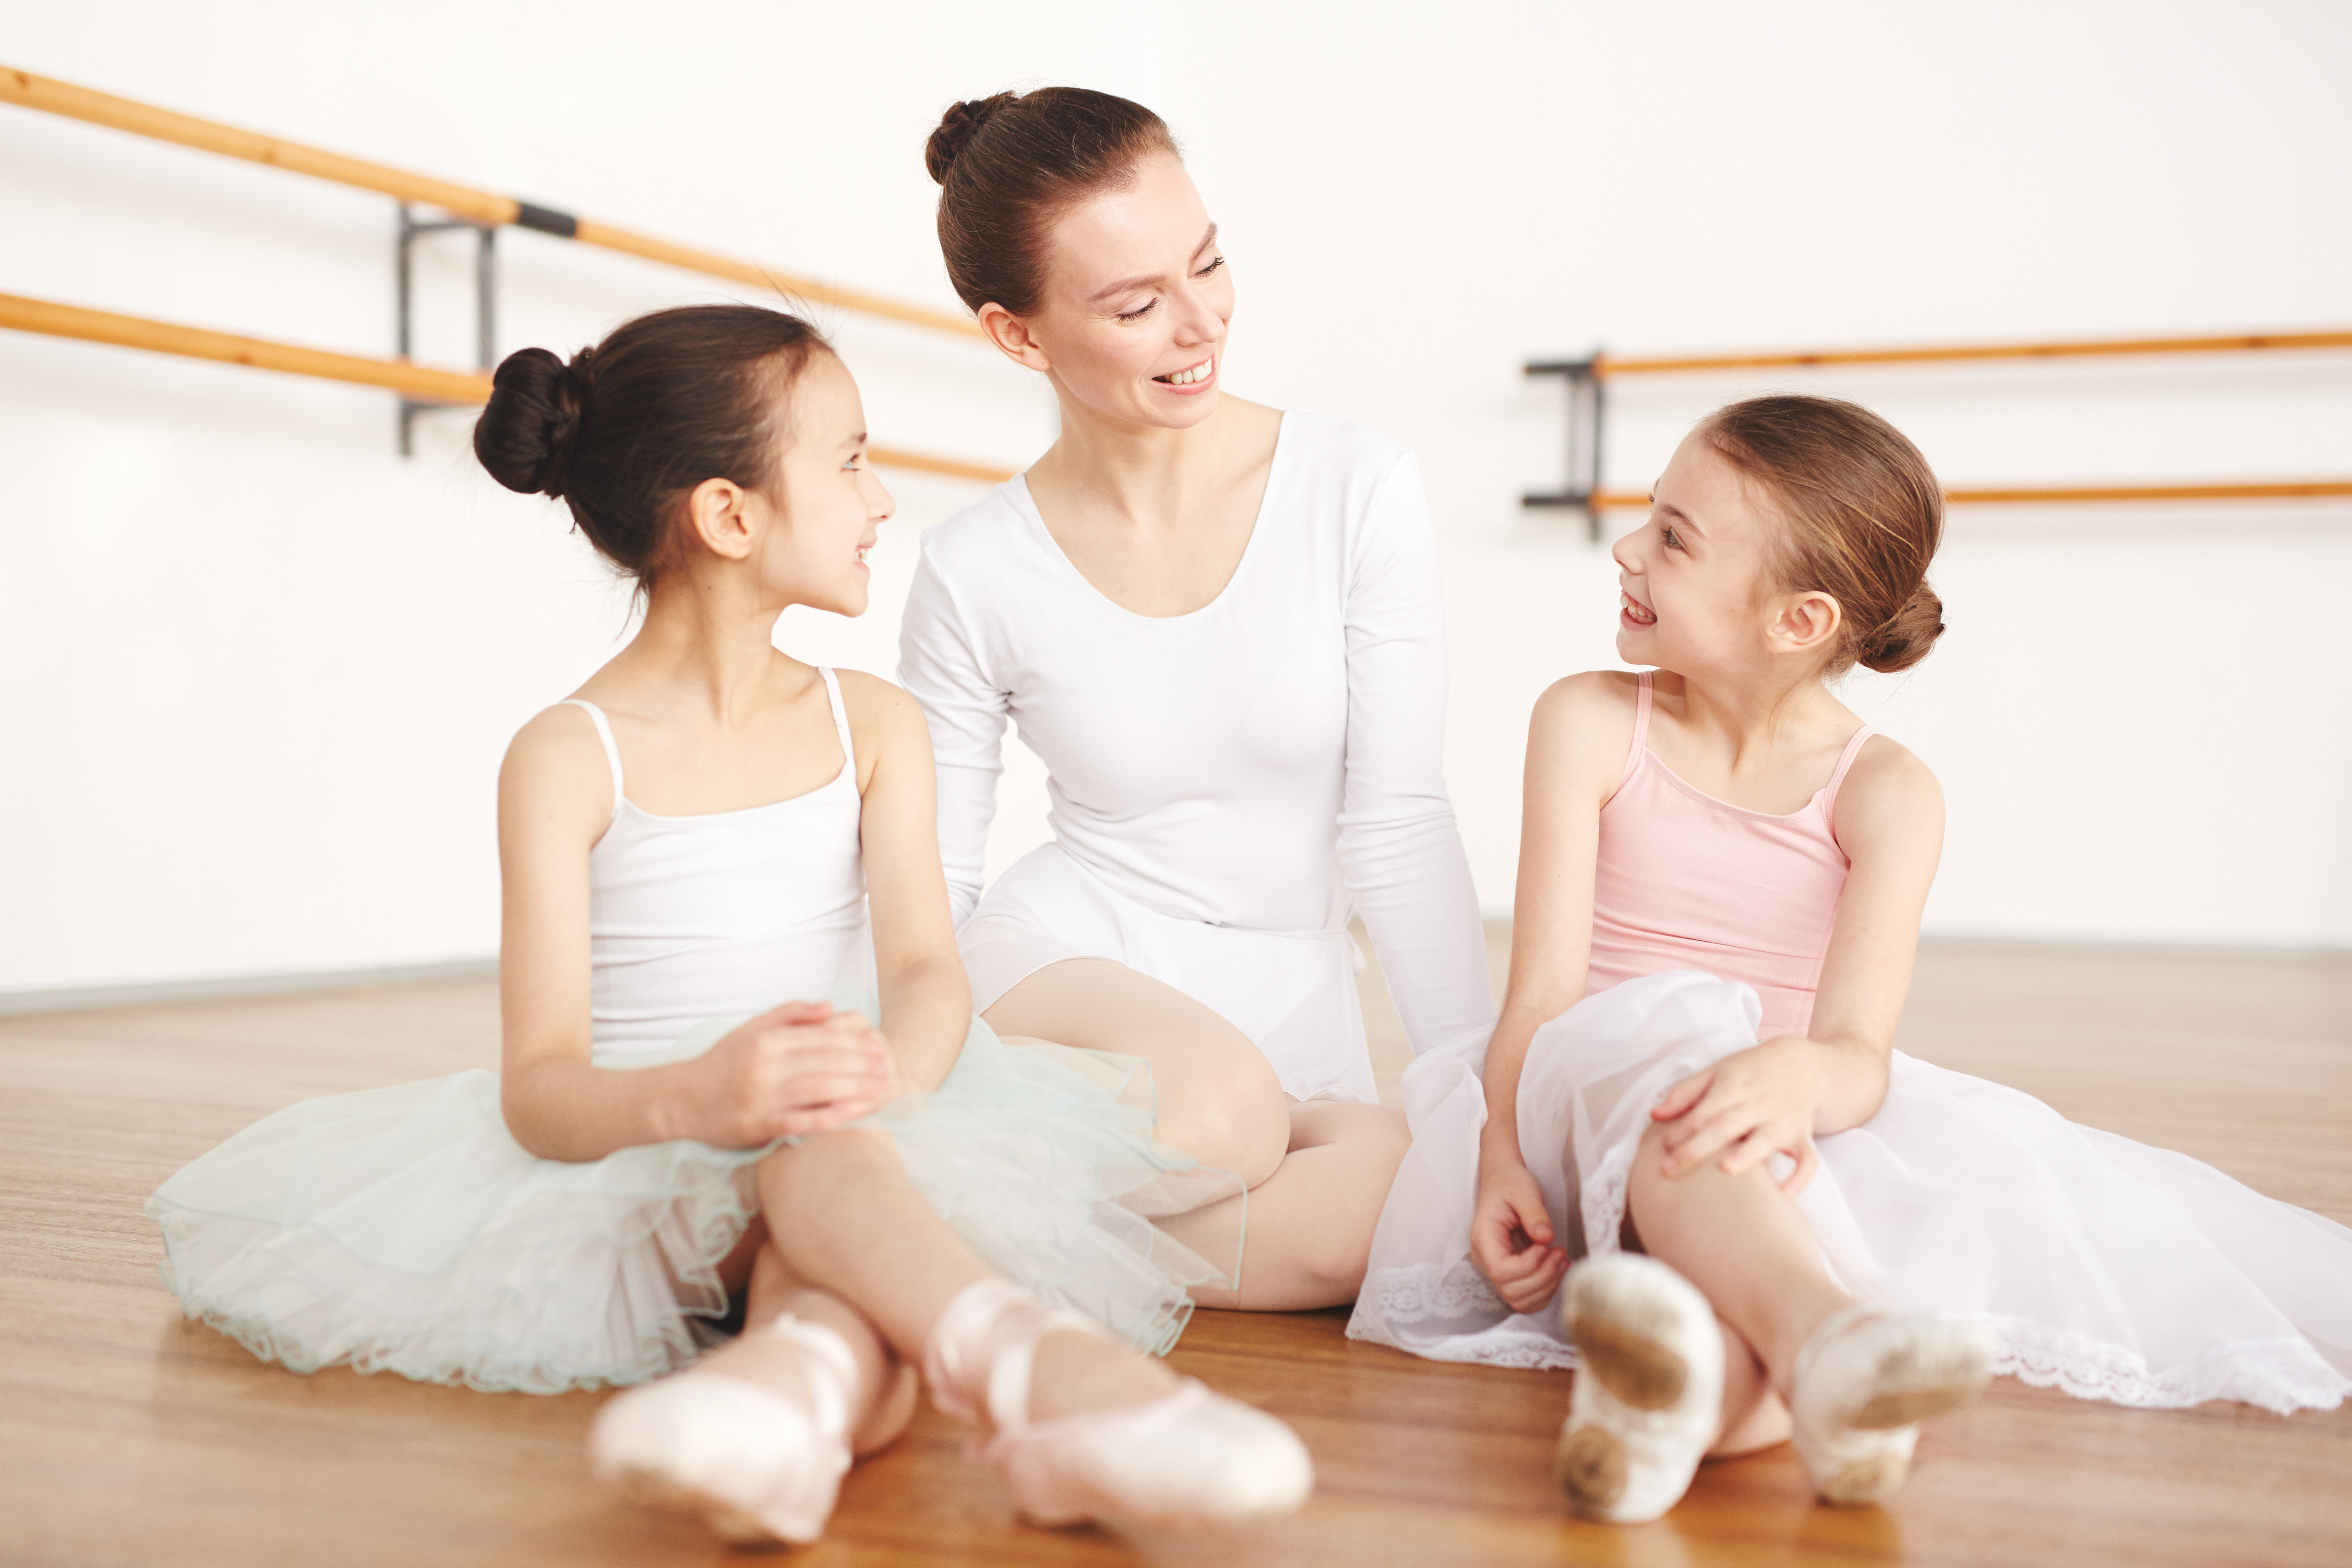 5_important_tips_you_should_be_teaching_by_your_students-teaching-dance-class-talent-dress-code-dancers-kid-thank-clothes-become-dancer-uniform-corrections-feedback-critique-